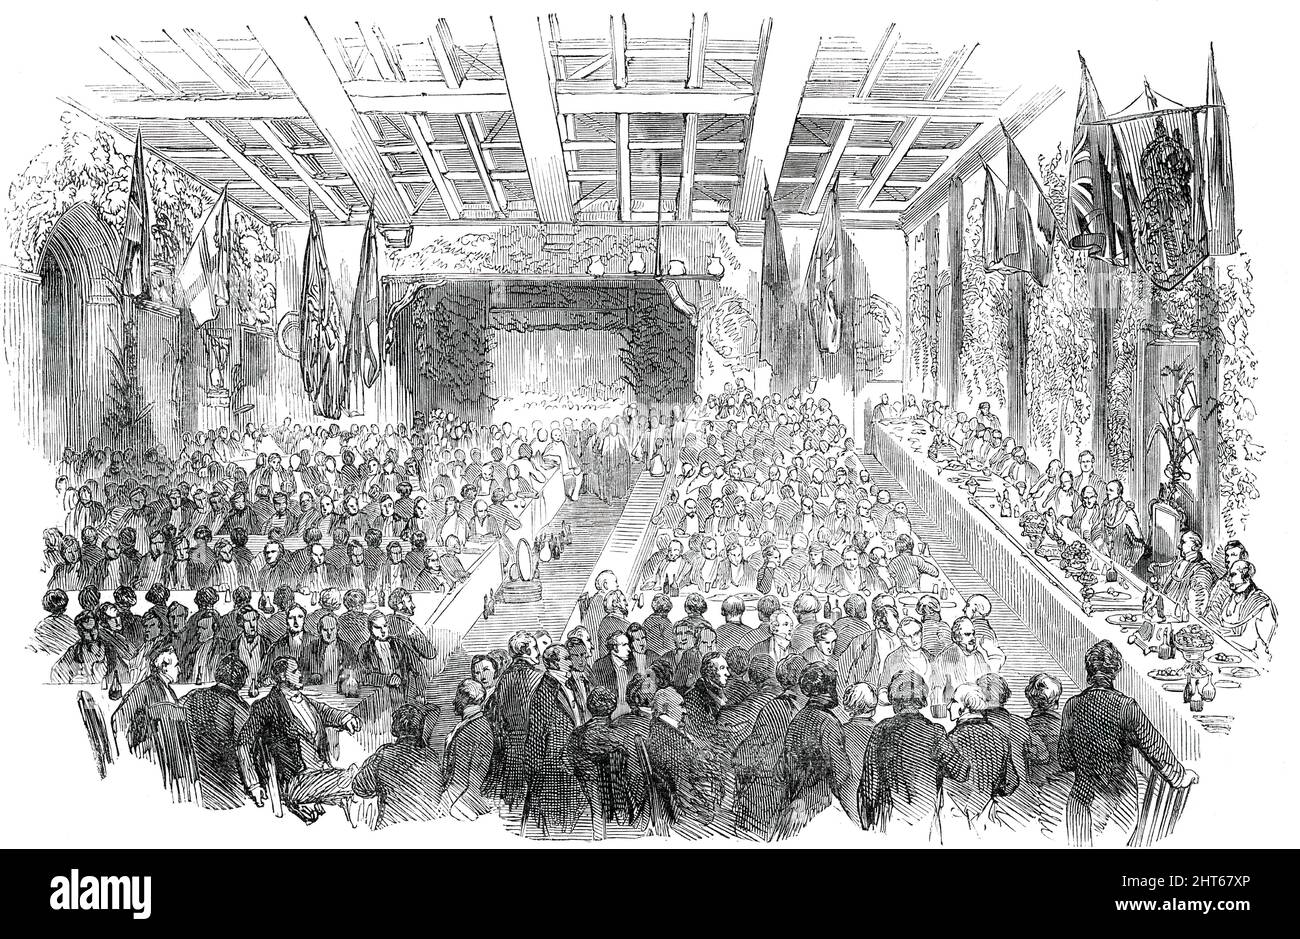 Banquet given by the Mayor of Southampton to the Lord Mayor and Sheriffs of London, 1850. Dinner given by Richard Andrews, Mayor of Southampton in Hampshire, '...to celebrate the successful progress in South Hants of public feeling in favour of the Great Industrial Exhibition ot 1851'. The banquet took place in Southampton Town Hall, of which '...both the interior and exterior were fitted up magnificently...On the tables were vases filled with flowers, and the top of the hall was wreathed with flowers and evergreens...The judicial bench formed a dais at which the principal guests sat'. Many to Stock Photo